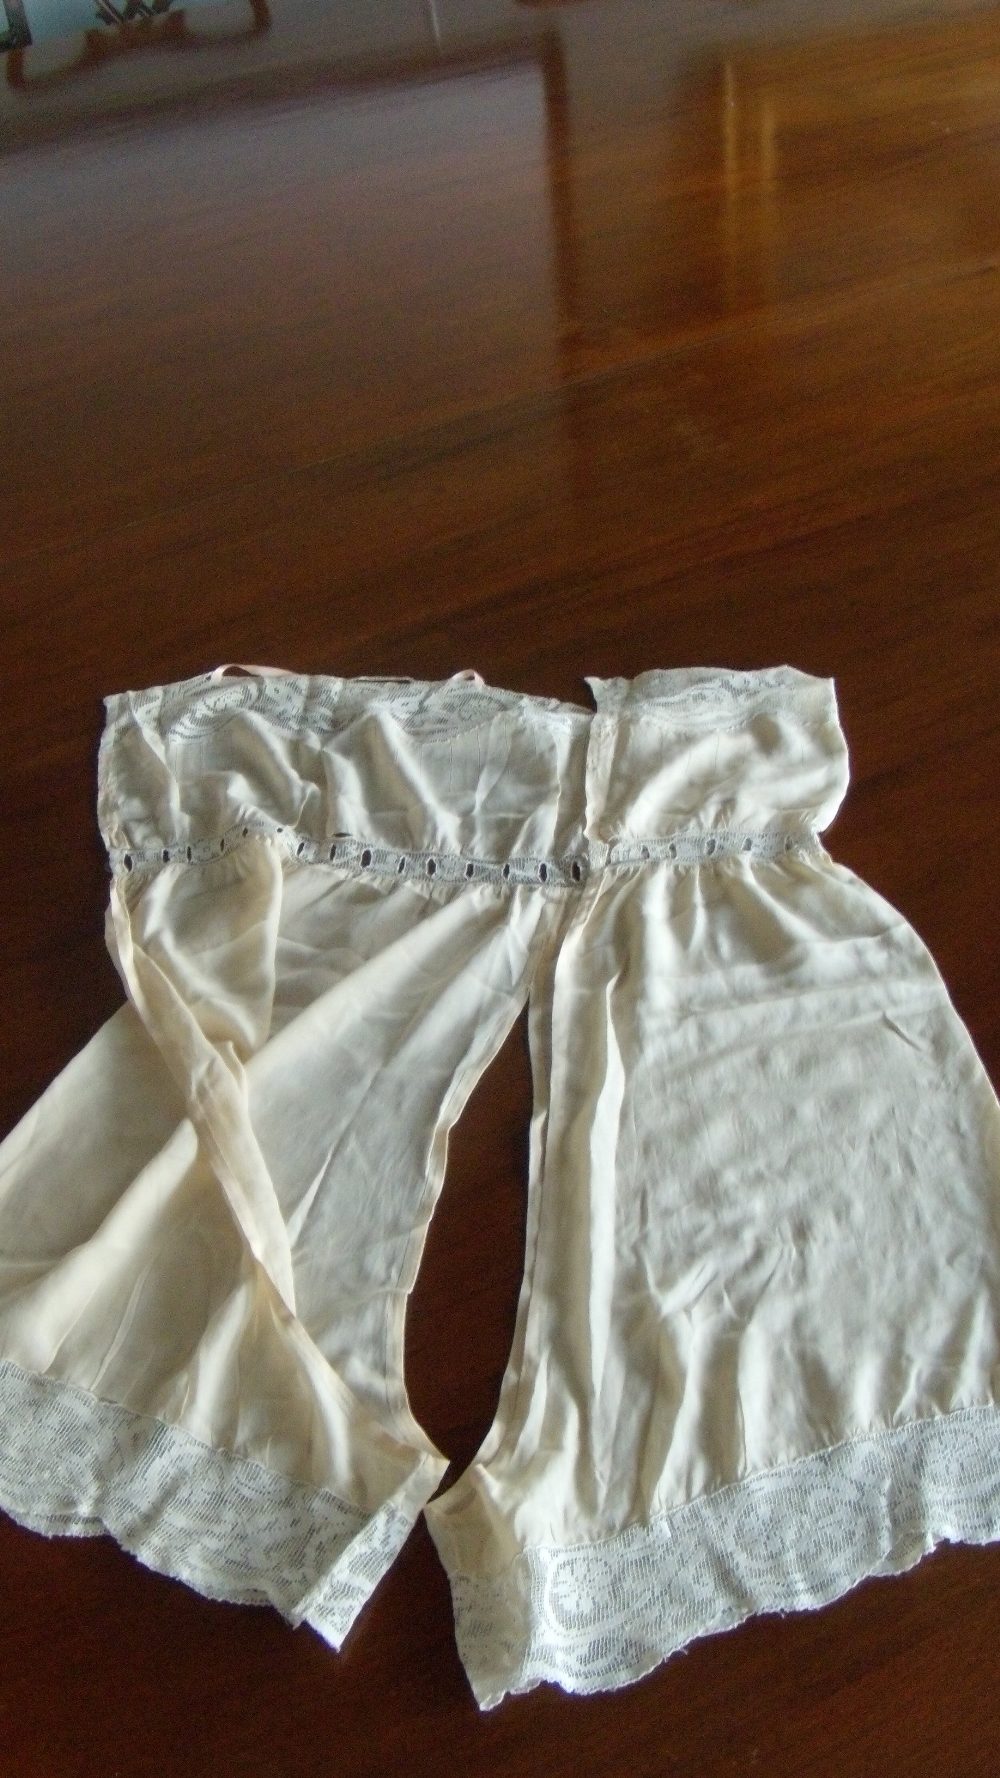 Three lace trimmed bodices, a pair of drawers and miscellaneous lace - Image 7 of 7